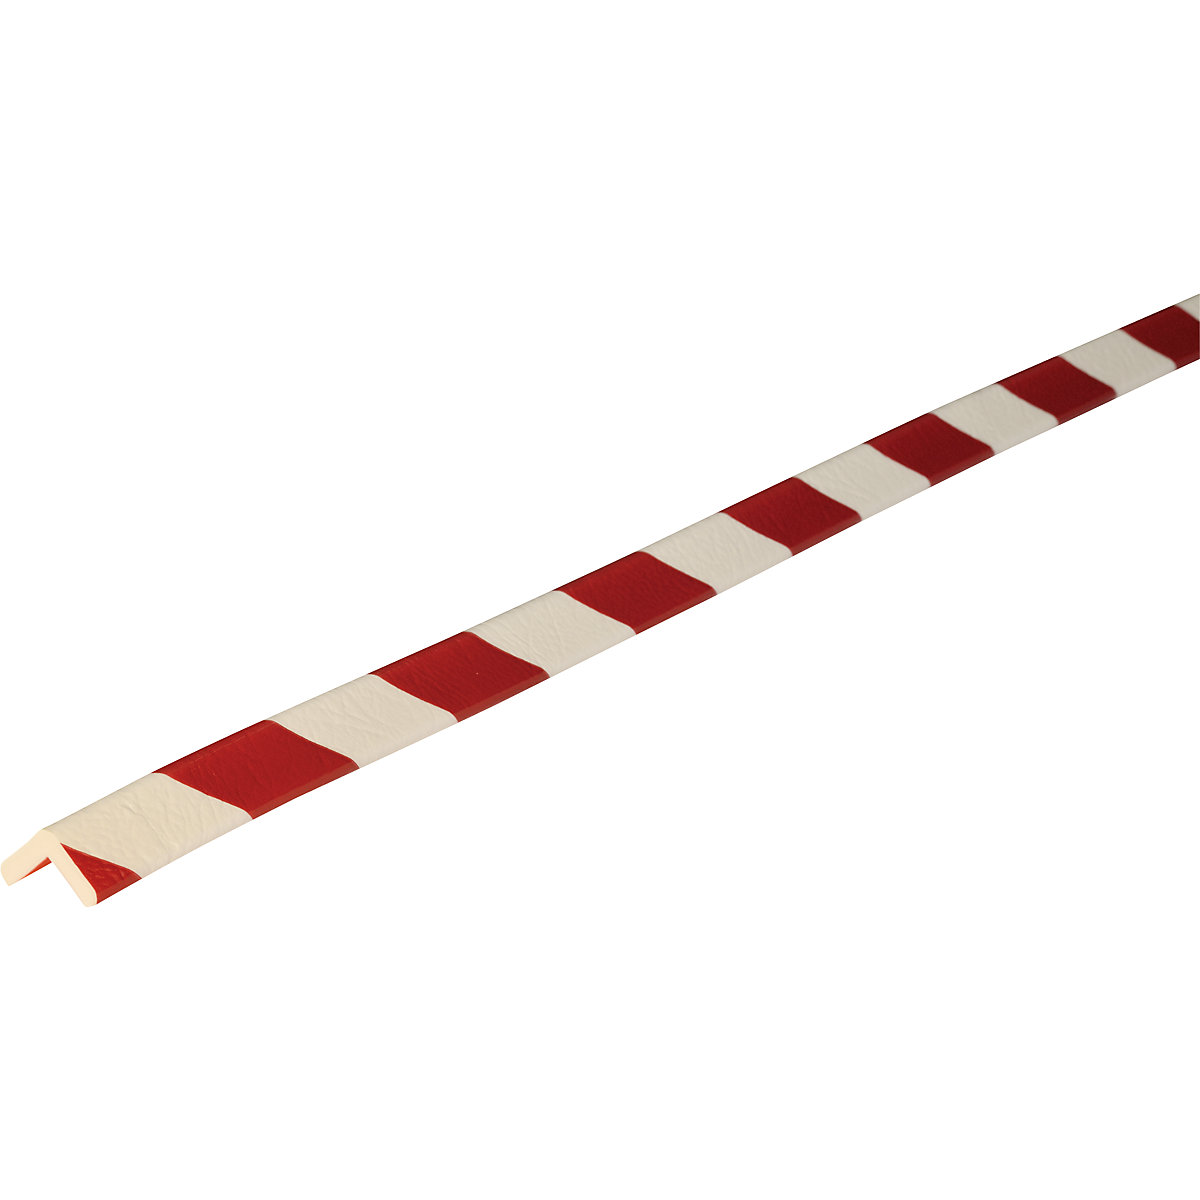 Knuffi® corner protection – SHG, type E, 1 x 5 m roll, red / white-24